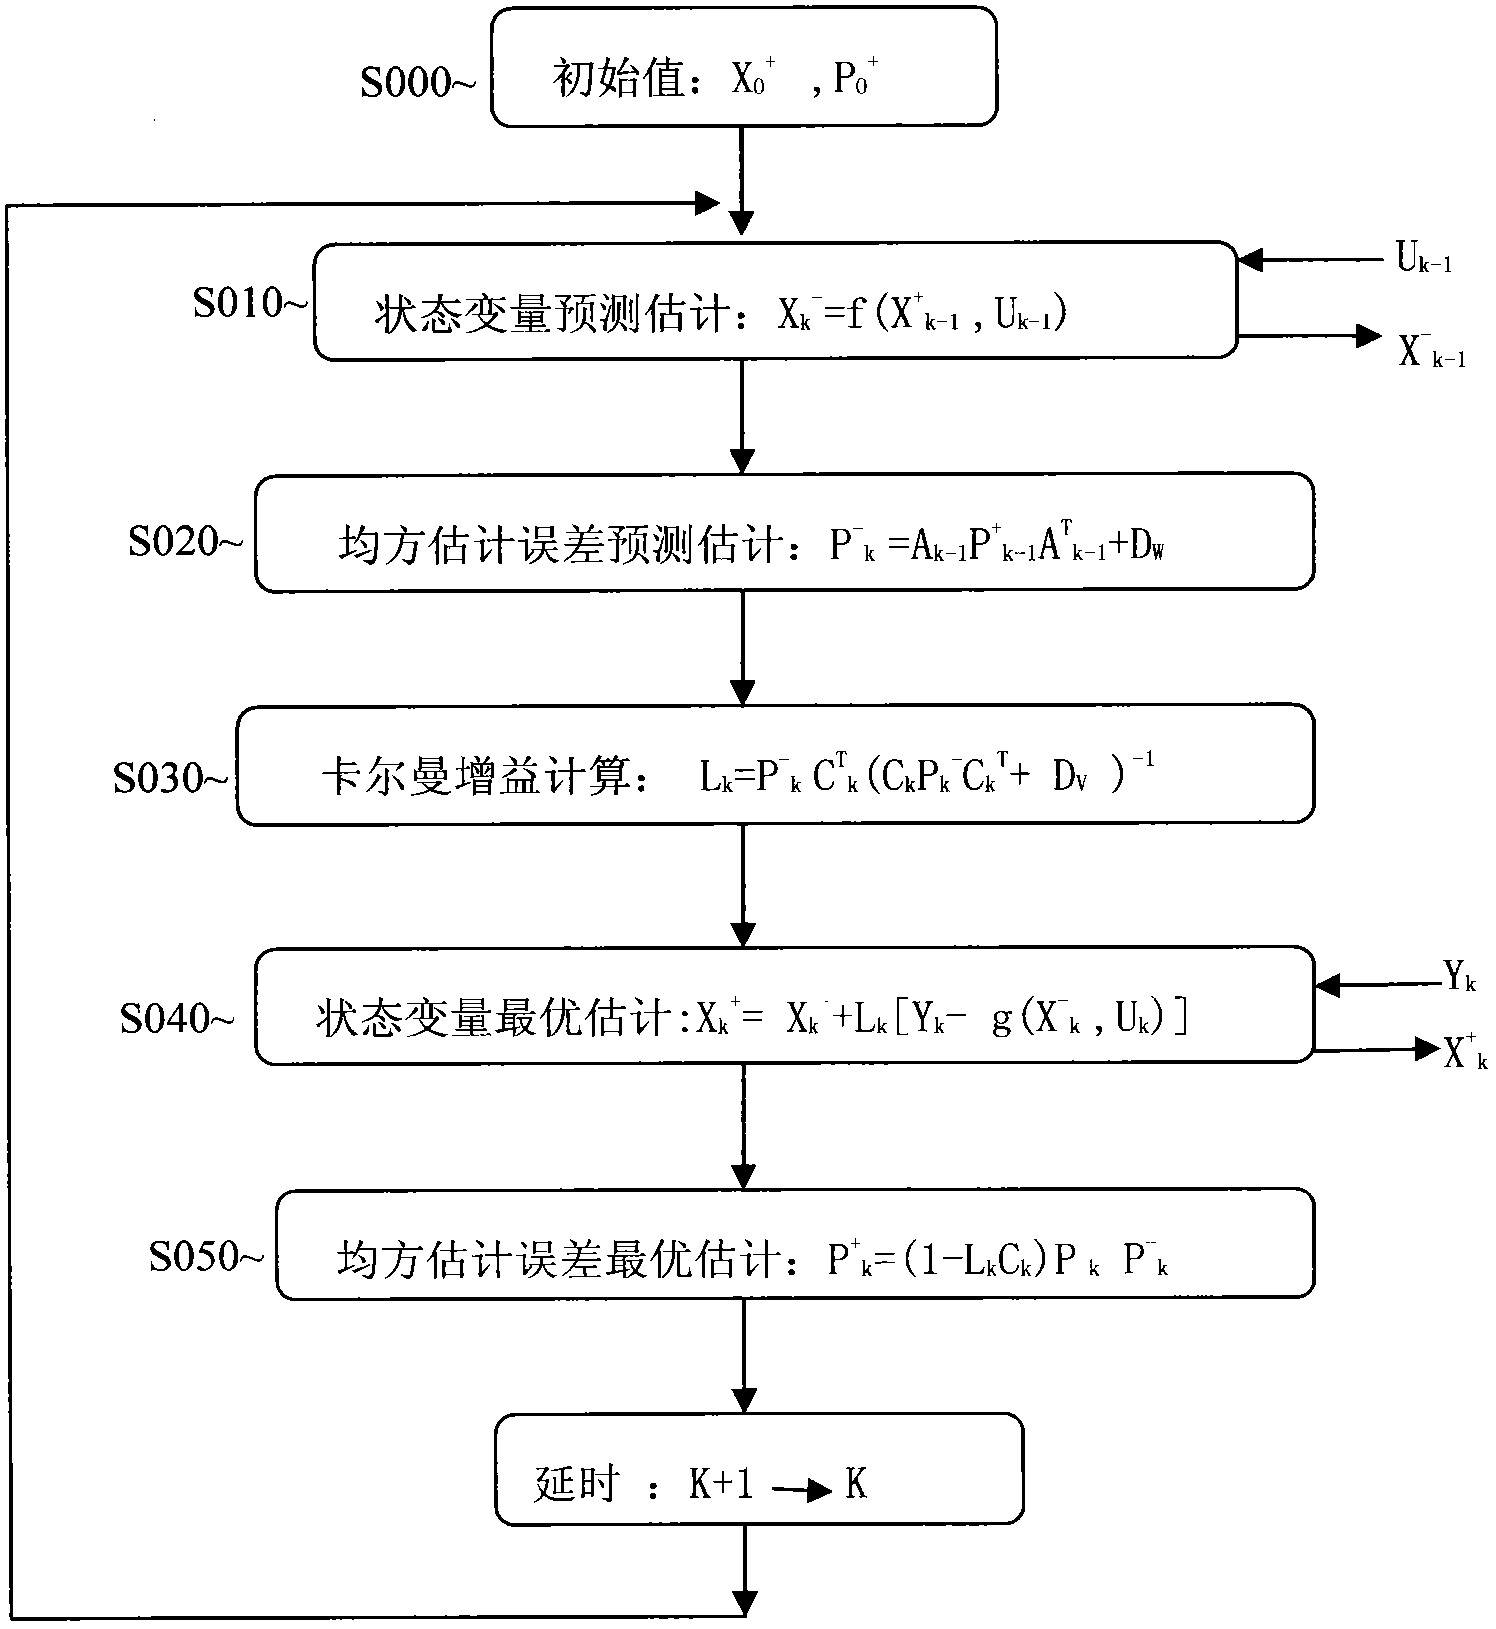 Lithium battery state of charge (SOC) estimation method